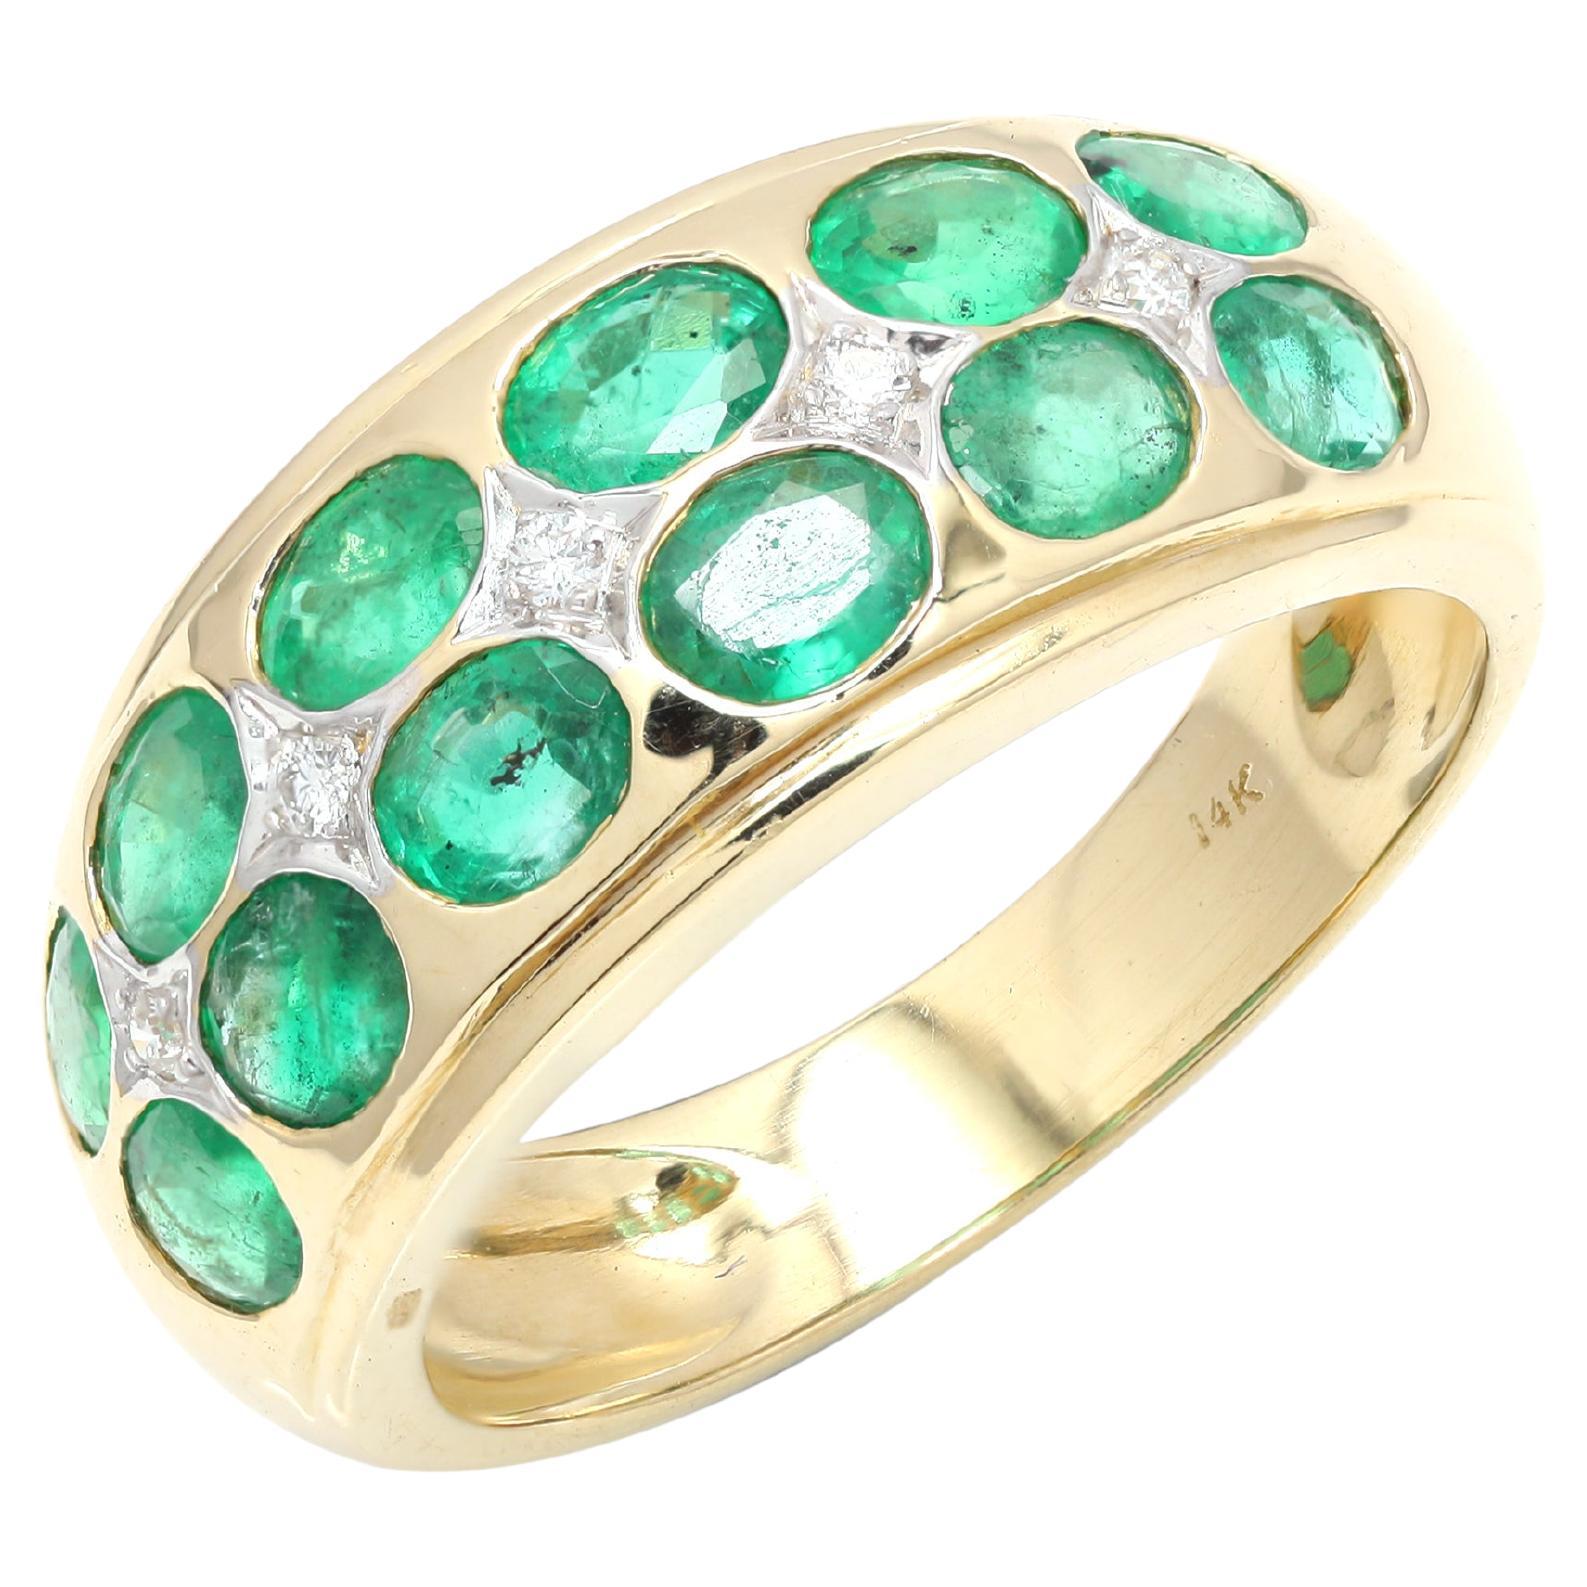 Natural 2.3 ct Emerald Band Ring with Diamonds Inlaid in 14K Yellow Gold